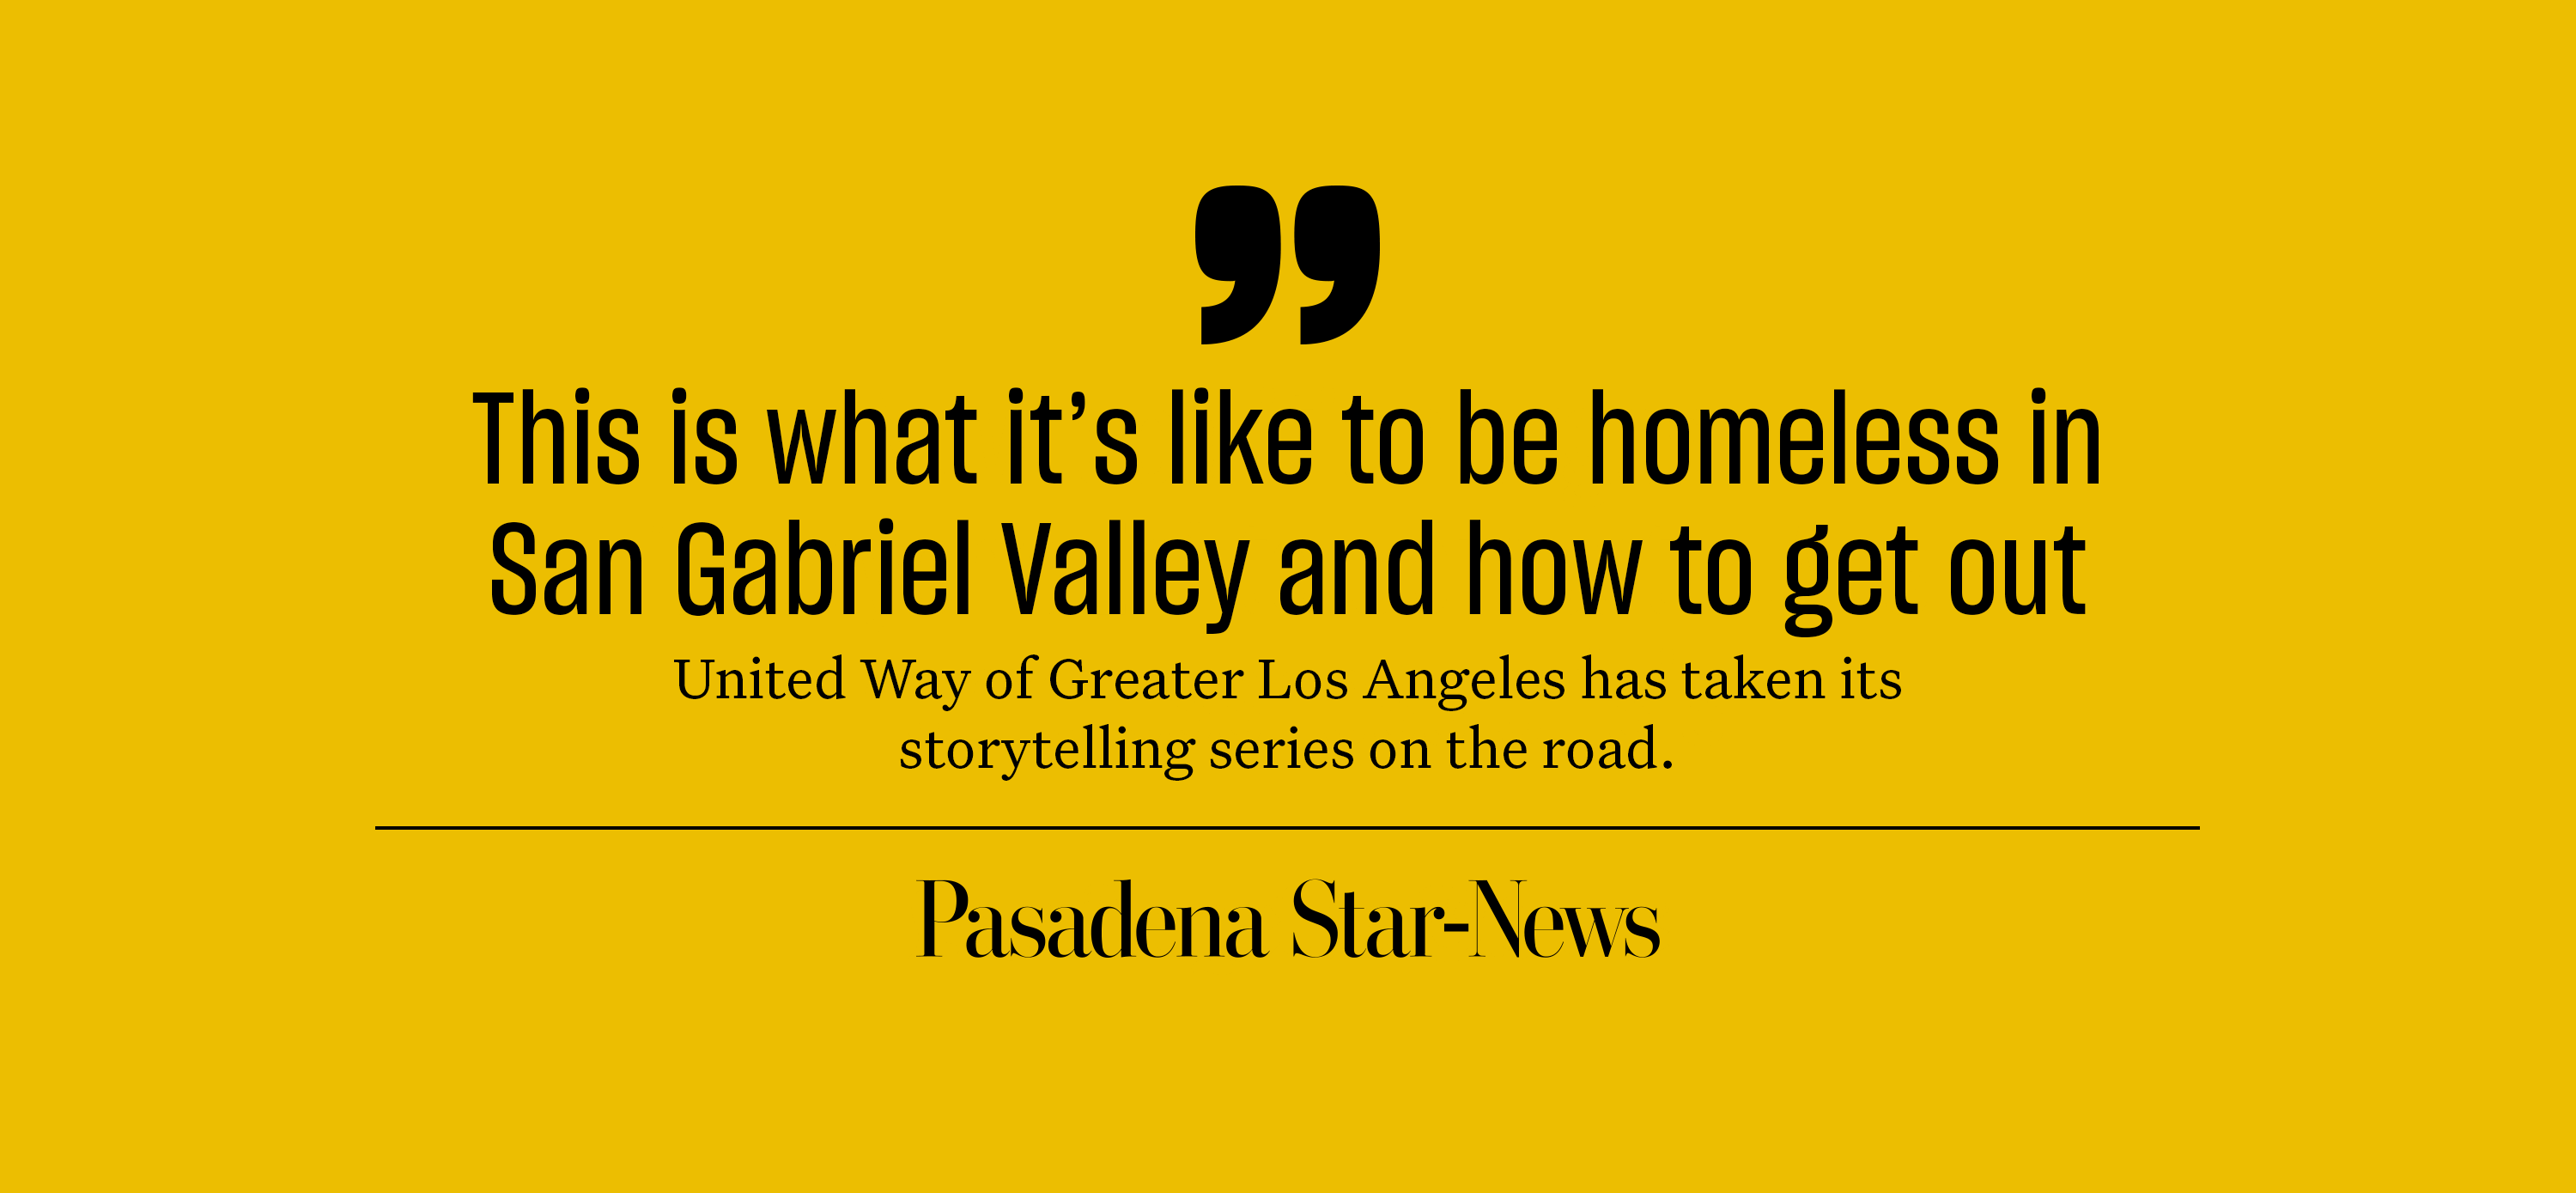 "This is what it's like to be homeless in San Gabriel Valley and how to get out. United Way of Greater Los Angeles has taken its storytelling series on the road." Pasadena Star-News.